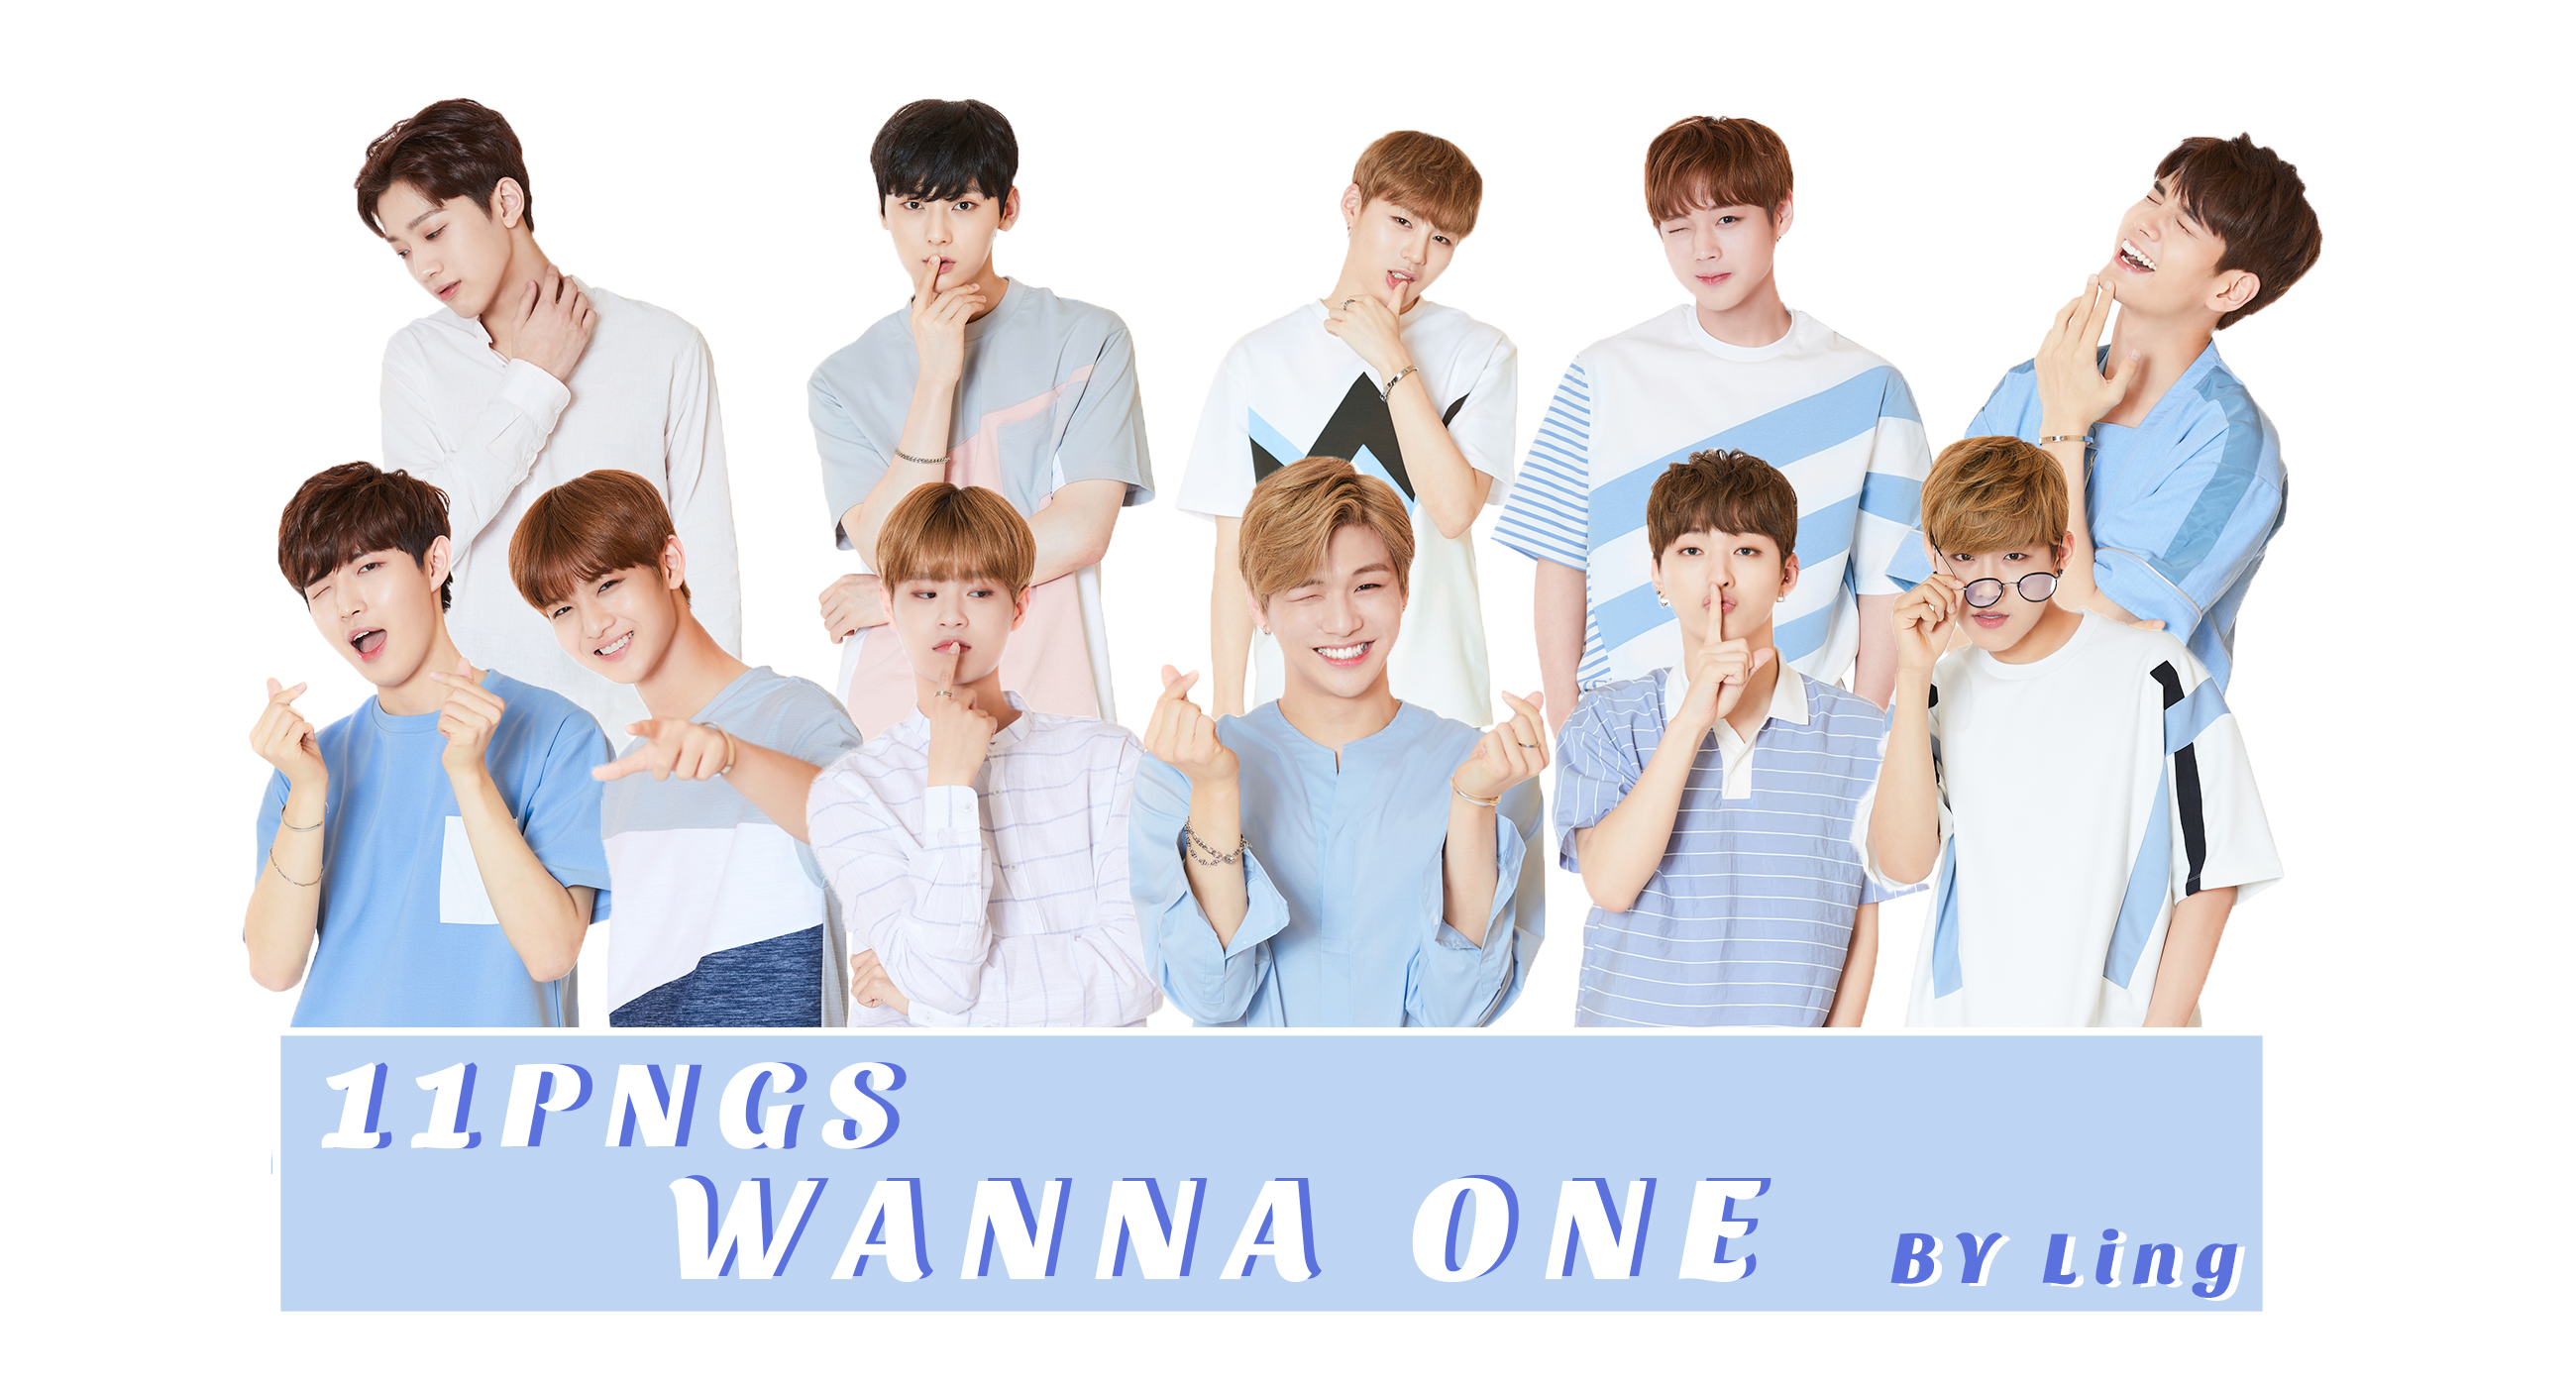 Png Pack Wanna One 11pngs By L8686837 On Deviantart